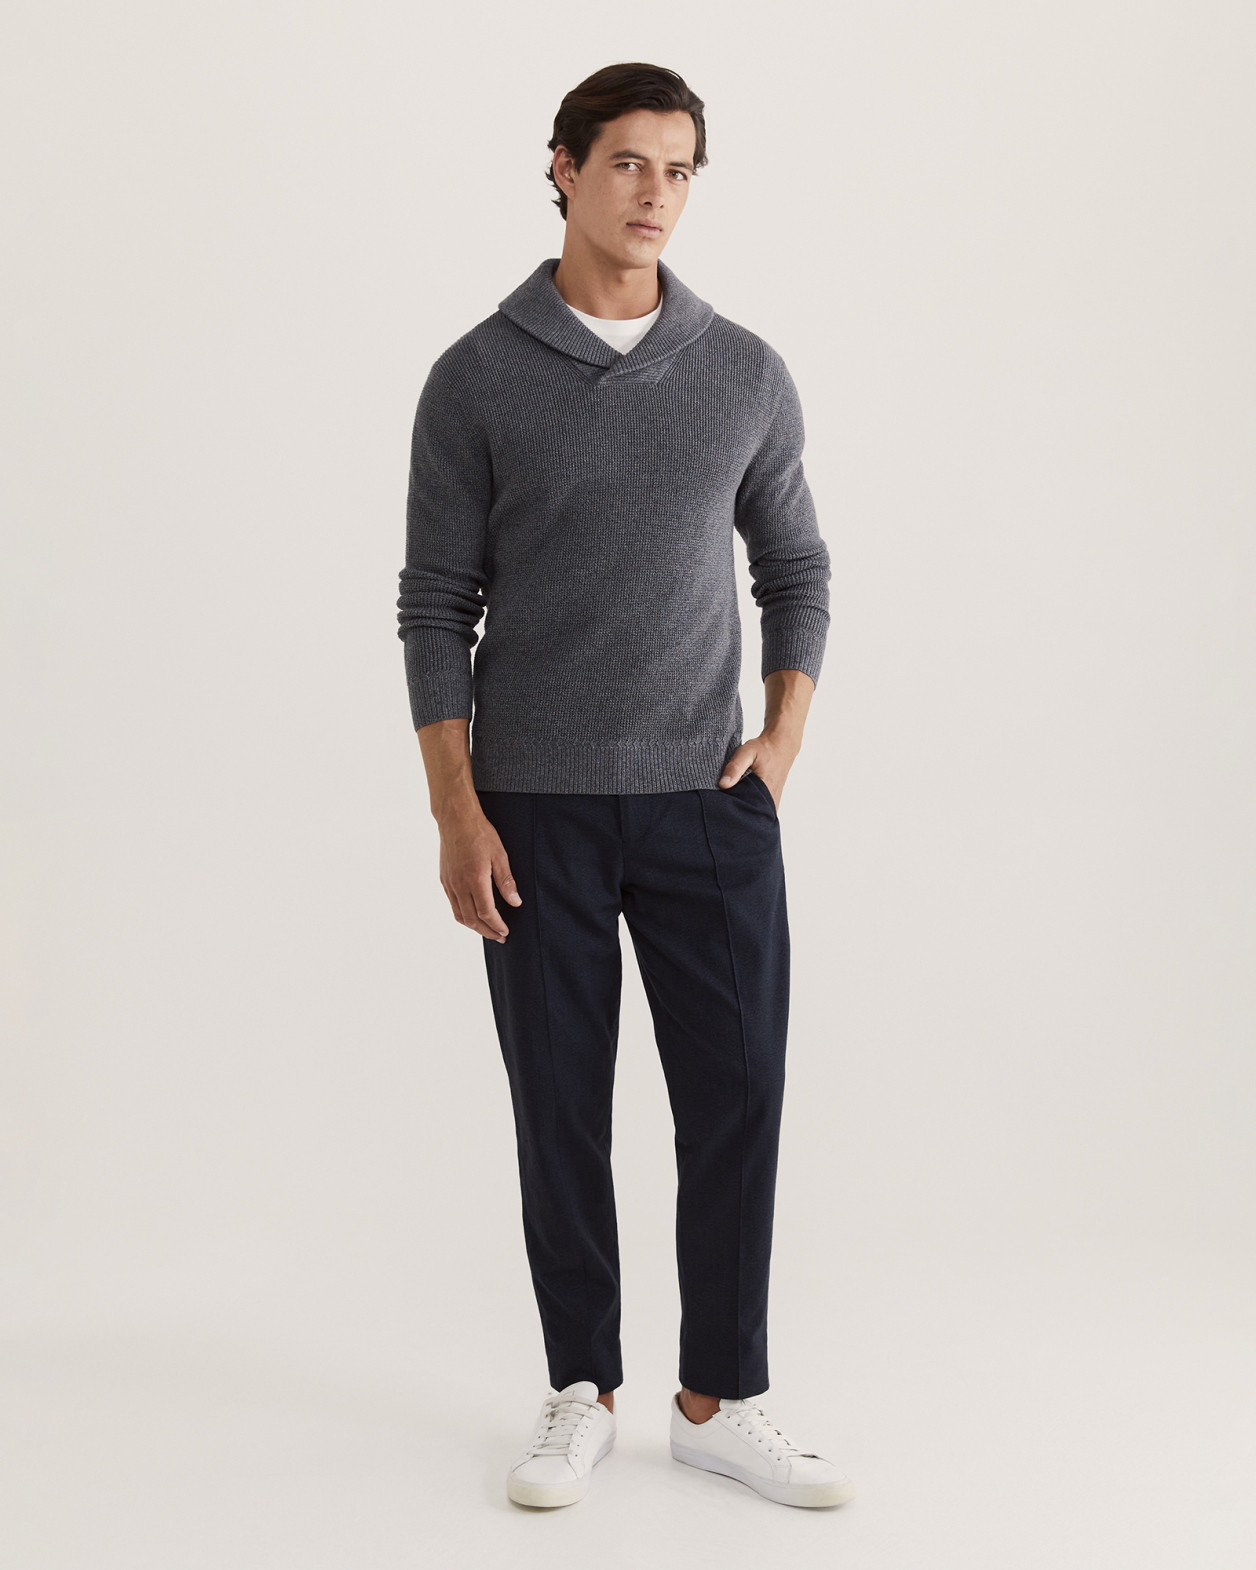 Angus Shawl Neck Knit in CHARCOAL